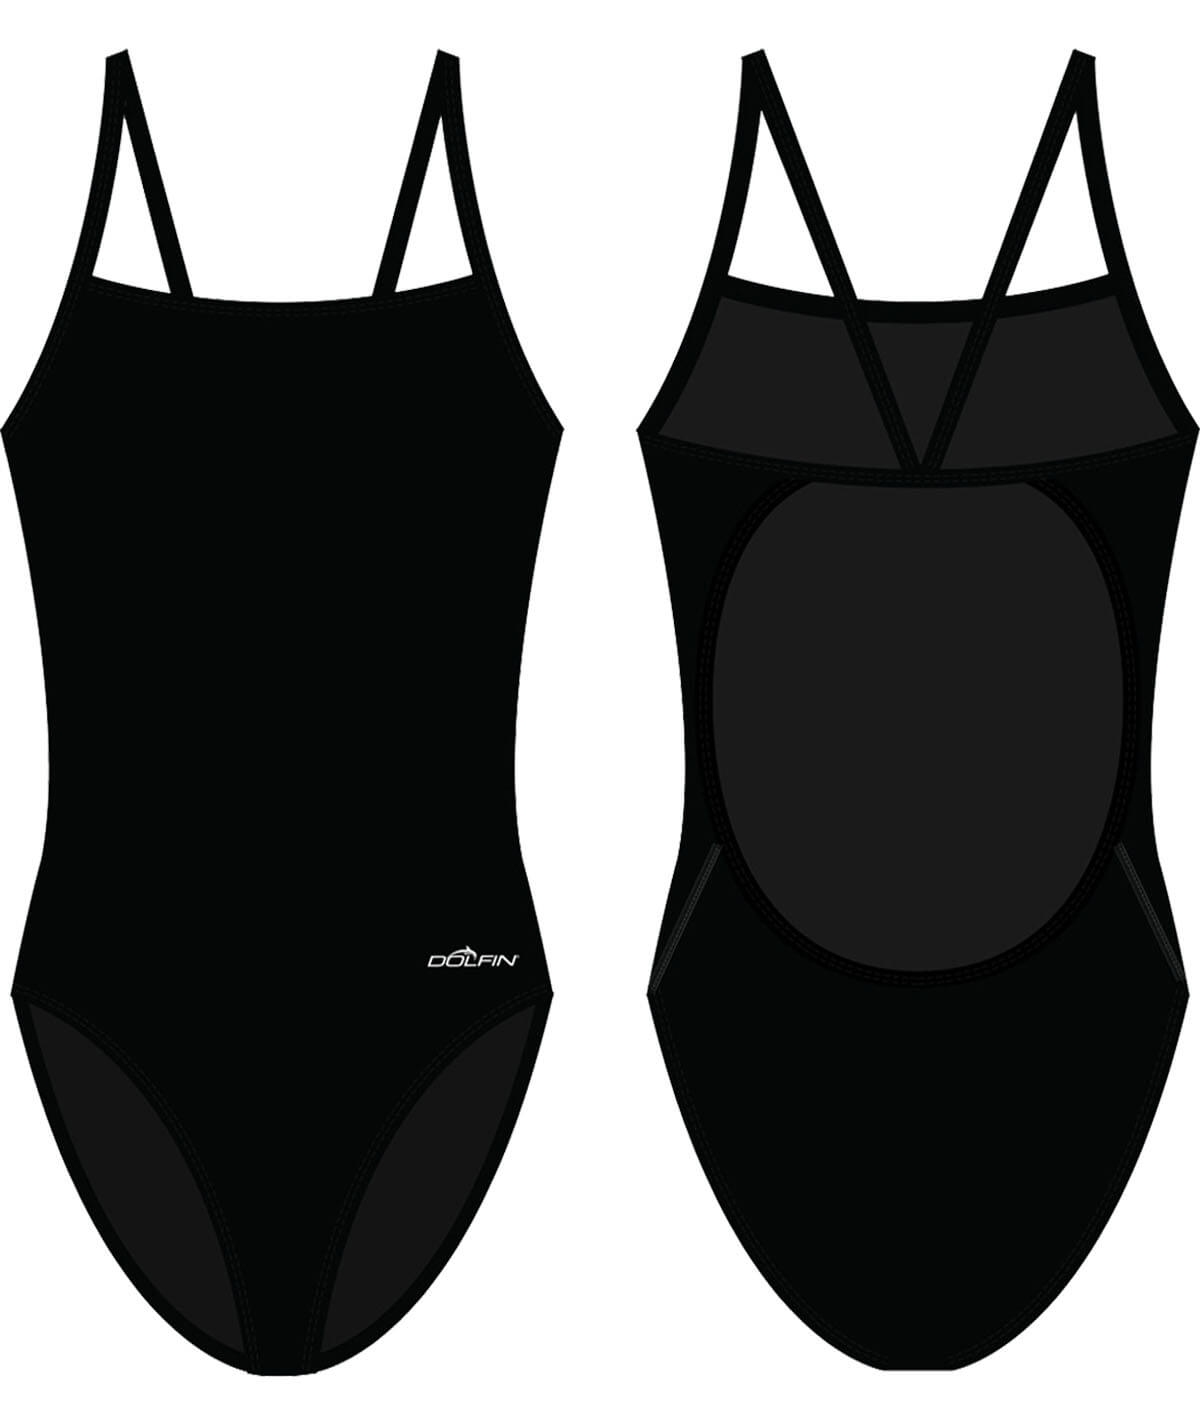 Fit Kit - Female Reliance Print String Back One Piece Swimsuit